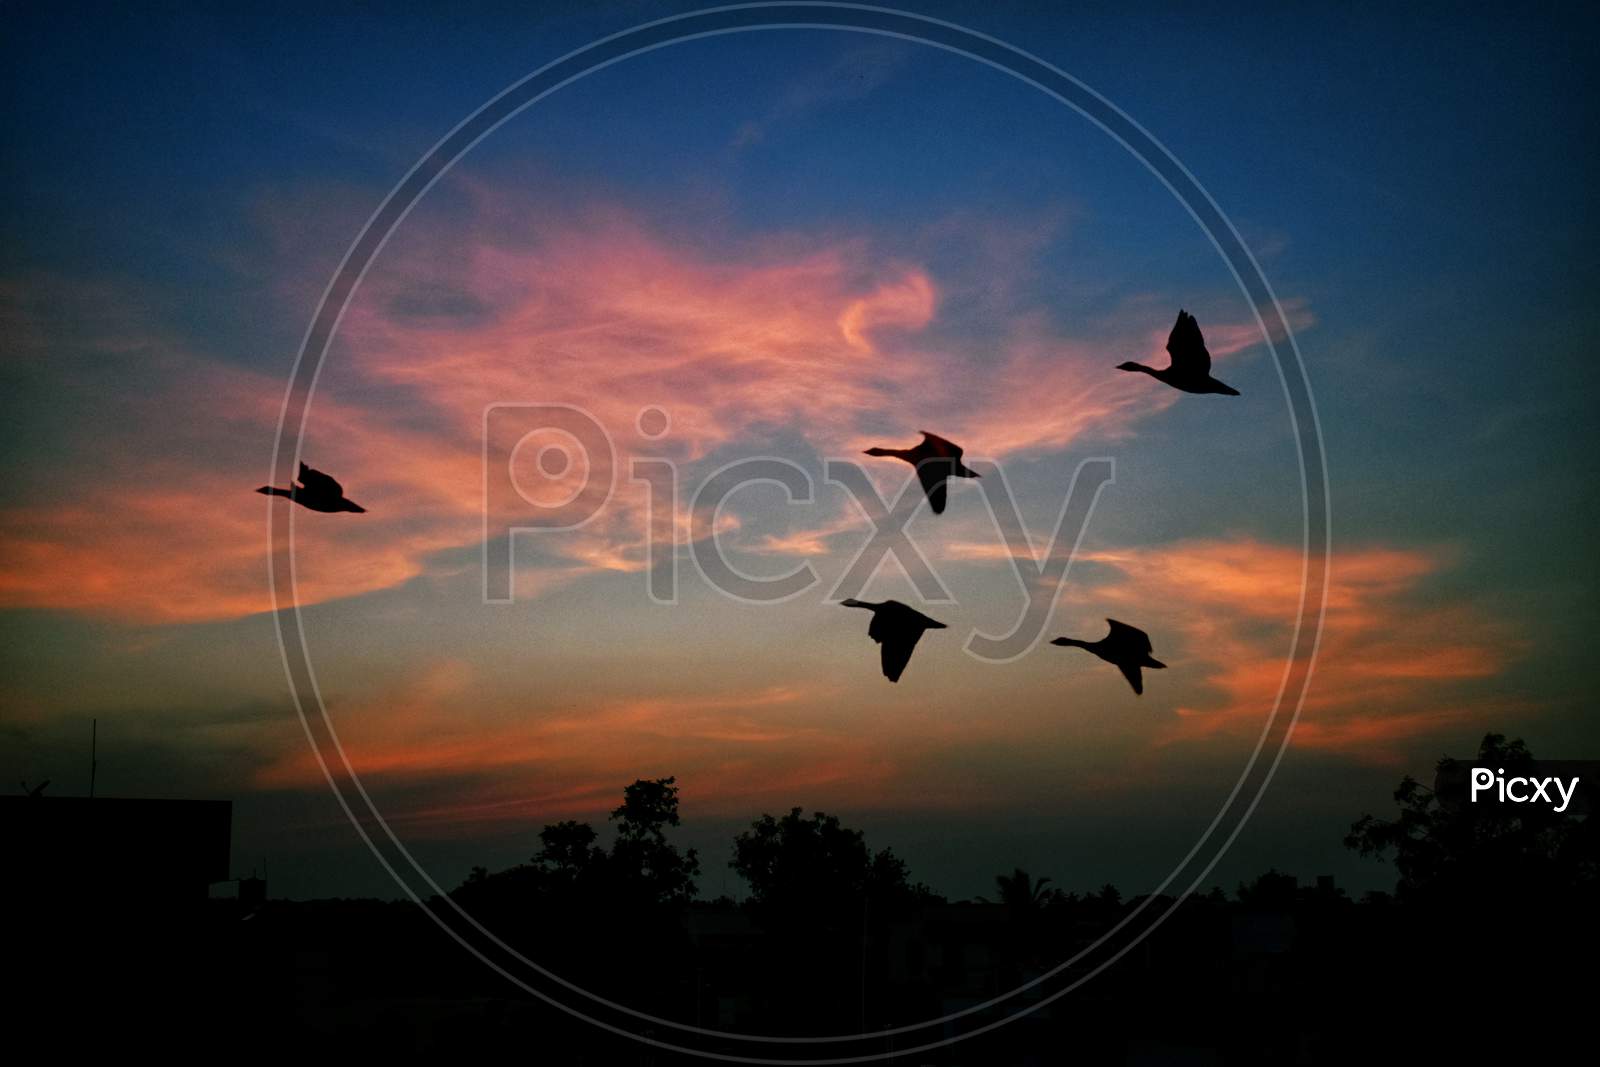 Birds flying in the sky , red and blue sky . a silhouette image of birds with sky and clouds